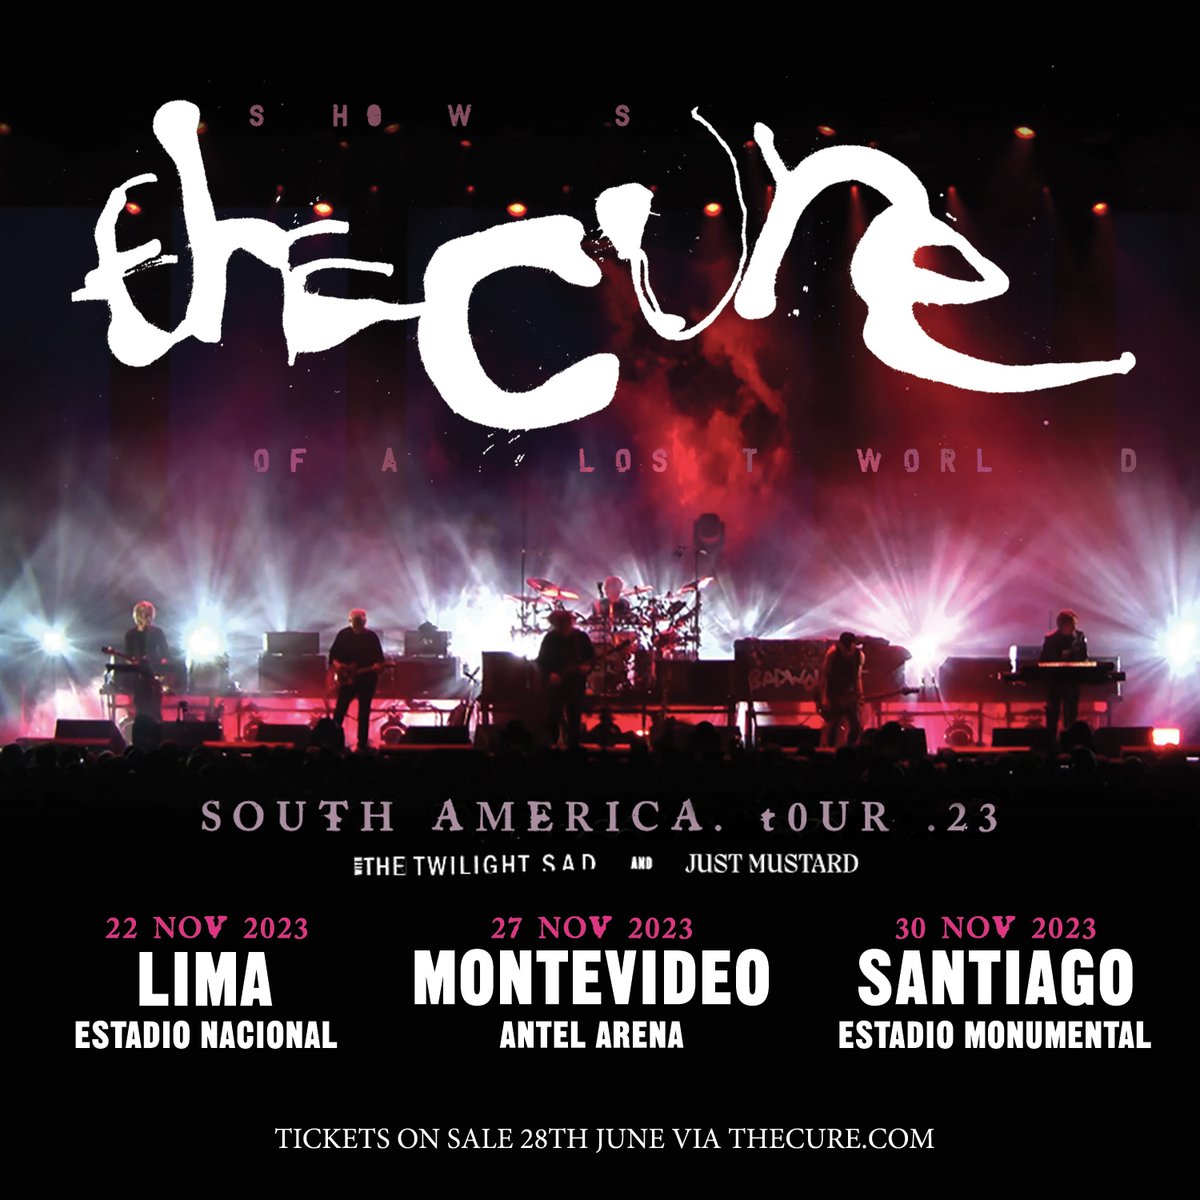 THE FINAL THREE DATES TO BE ANNOUNCED FOR THE SOUTH AMERICAN LEG OF THE SHOWS OF A LOST WORLD 2023 TOUR WILL TAKE PLACE IN LIMA, MONTEVIDEO AND SANTIAGO IN NOVEMBER.  DETAILS AT THECURE.COM/NEWS/